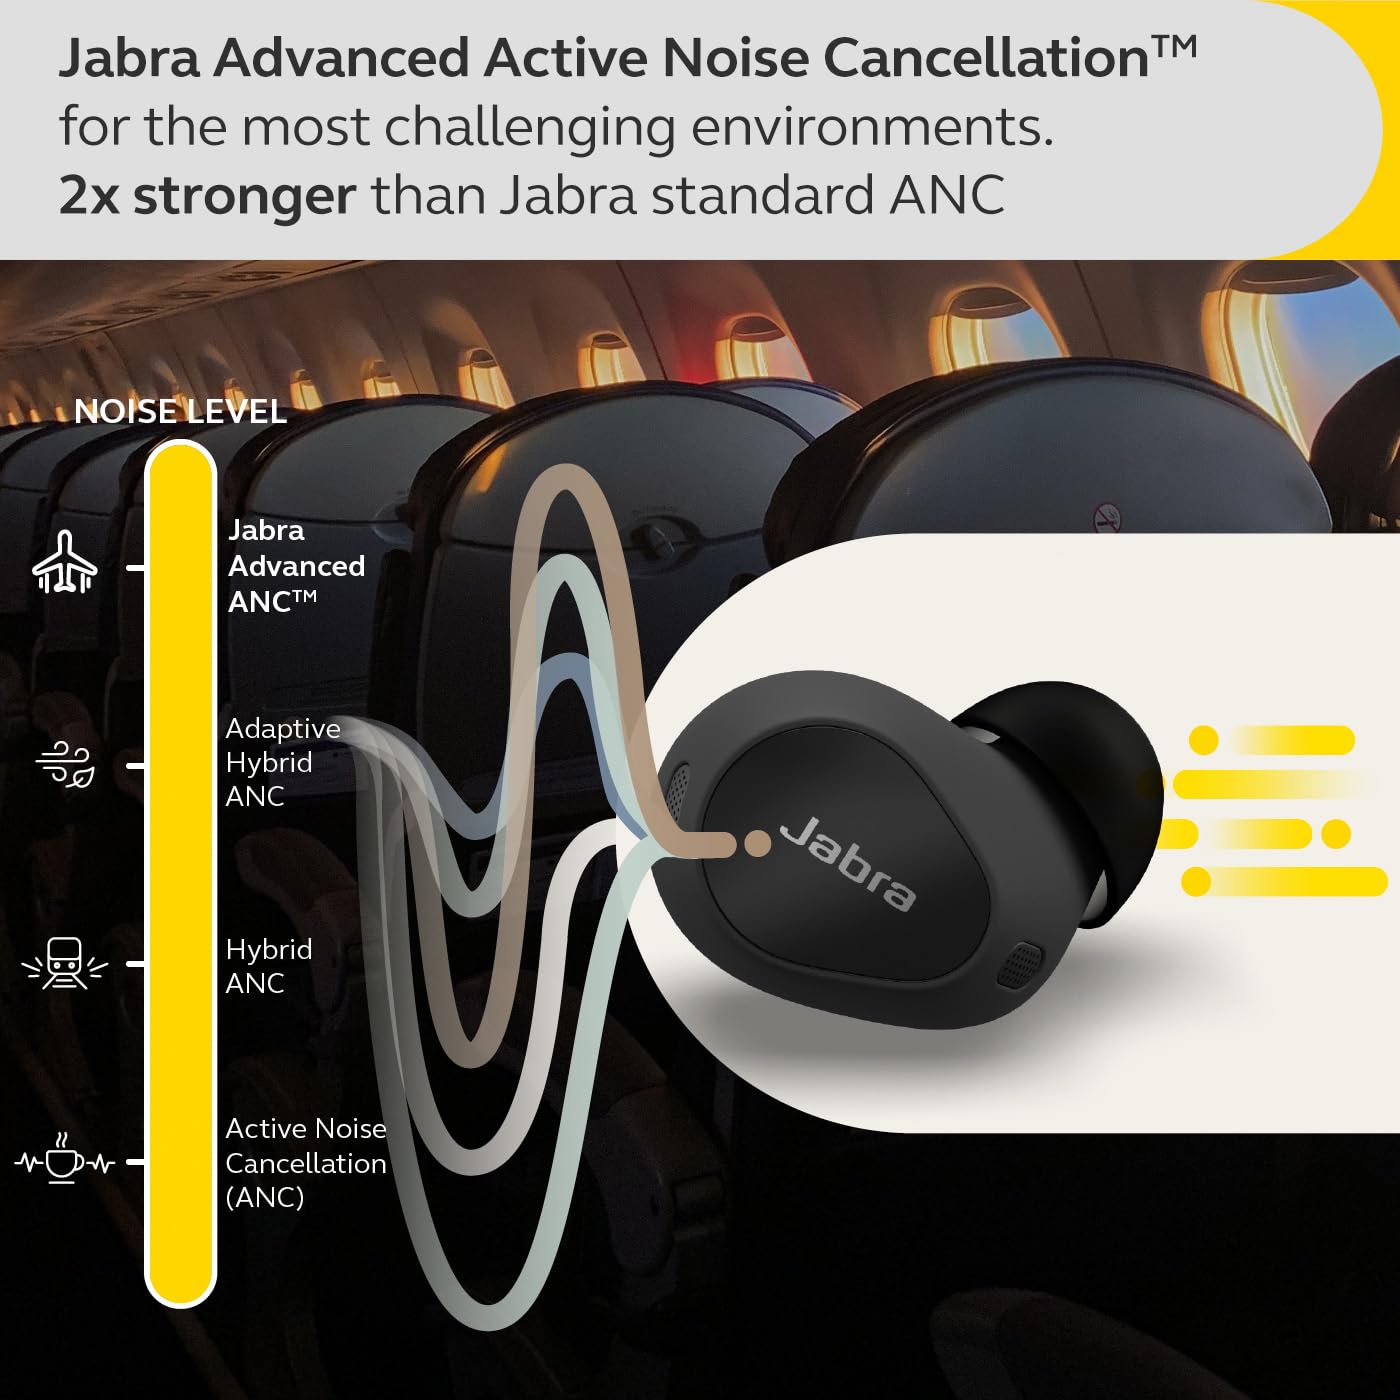 Jabra Elite 10 True Wireless Earbuds – Advanced Active Noise Cancelling Earbuds with Next-Level Dolby Atmos Surround Sound –All-Day Comfort, Multipoint Bluetooth, Wireless Charging – Gloss Black